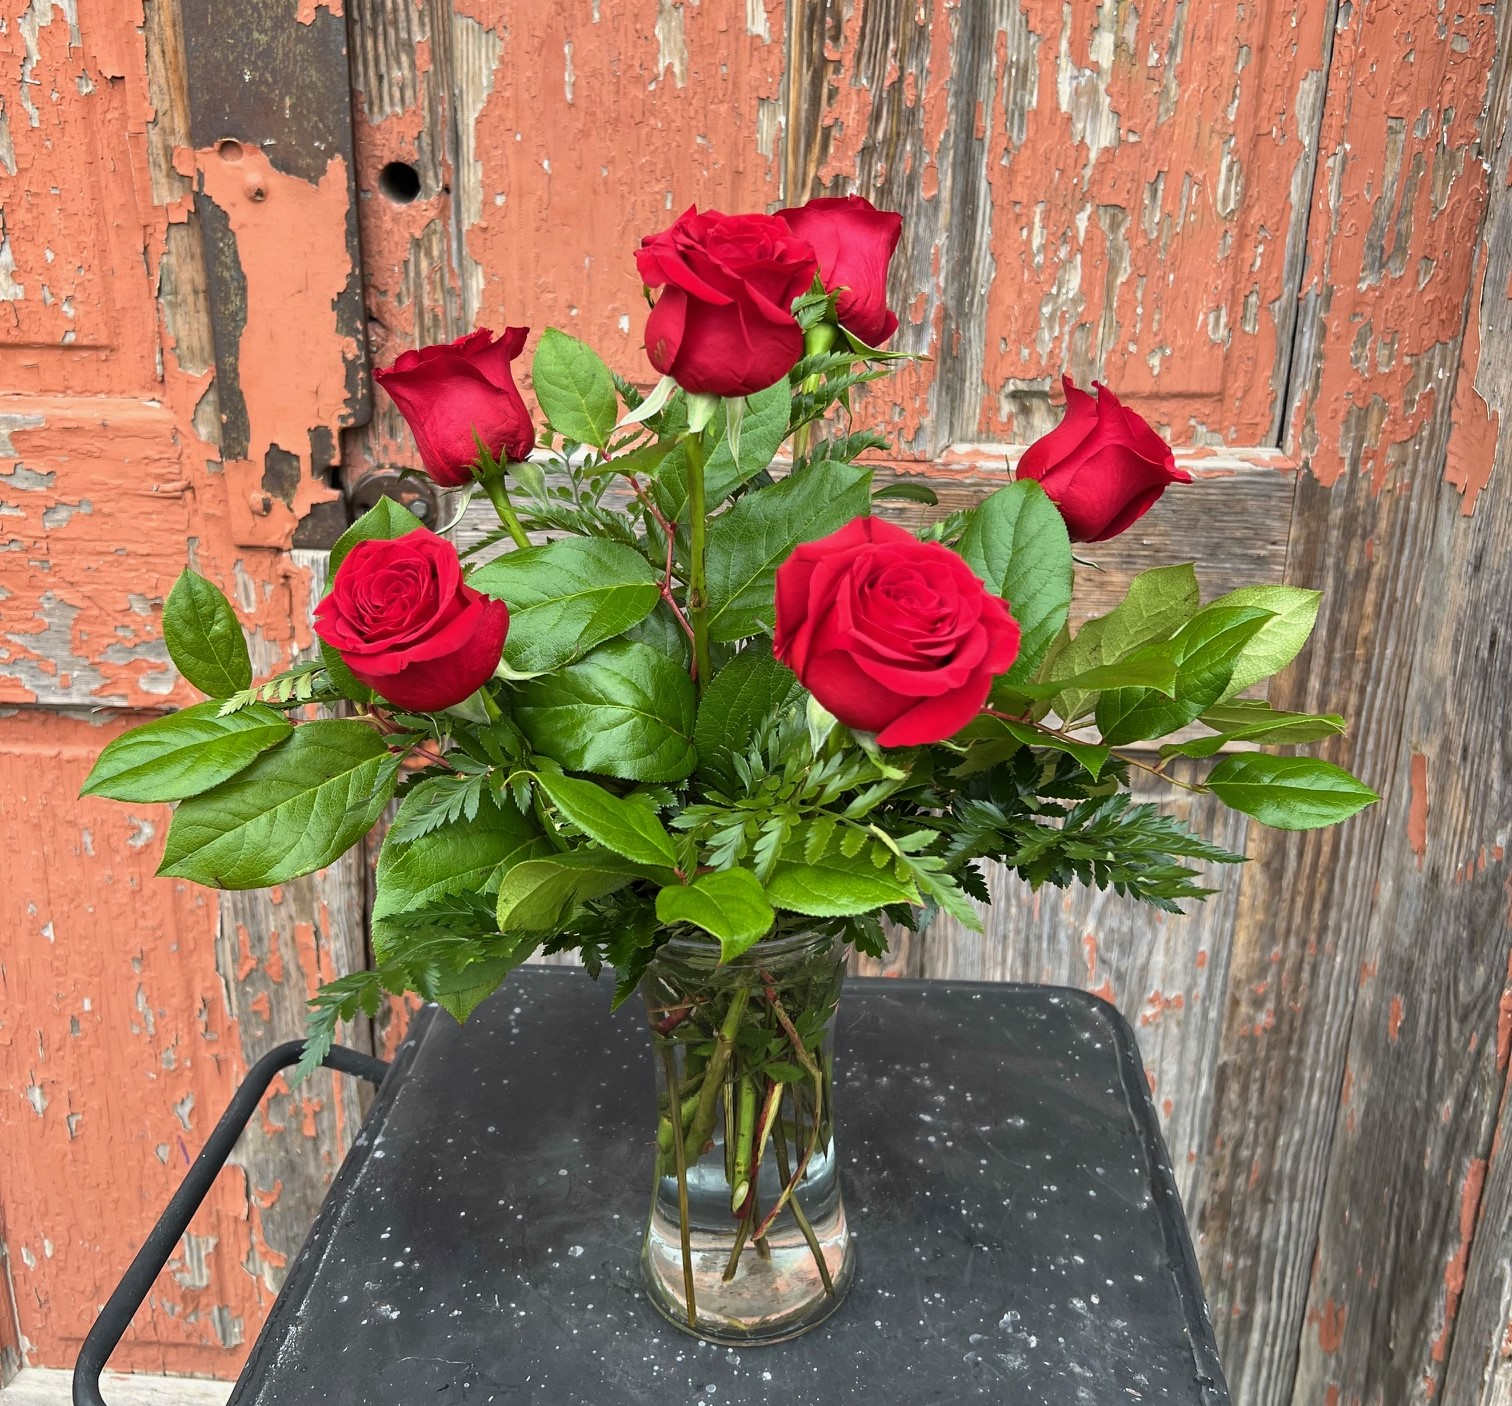 Red Half Dozen - Half a dozen beautifully arranged roses in color of your choice. Standard price is as pictured. Deluxe pricing includes accent flower and additional greens.